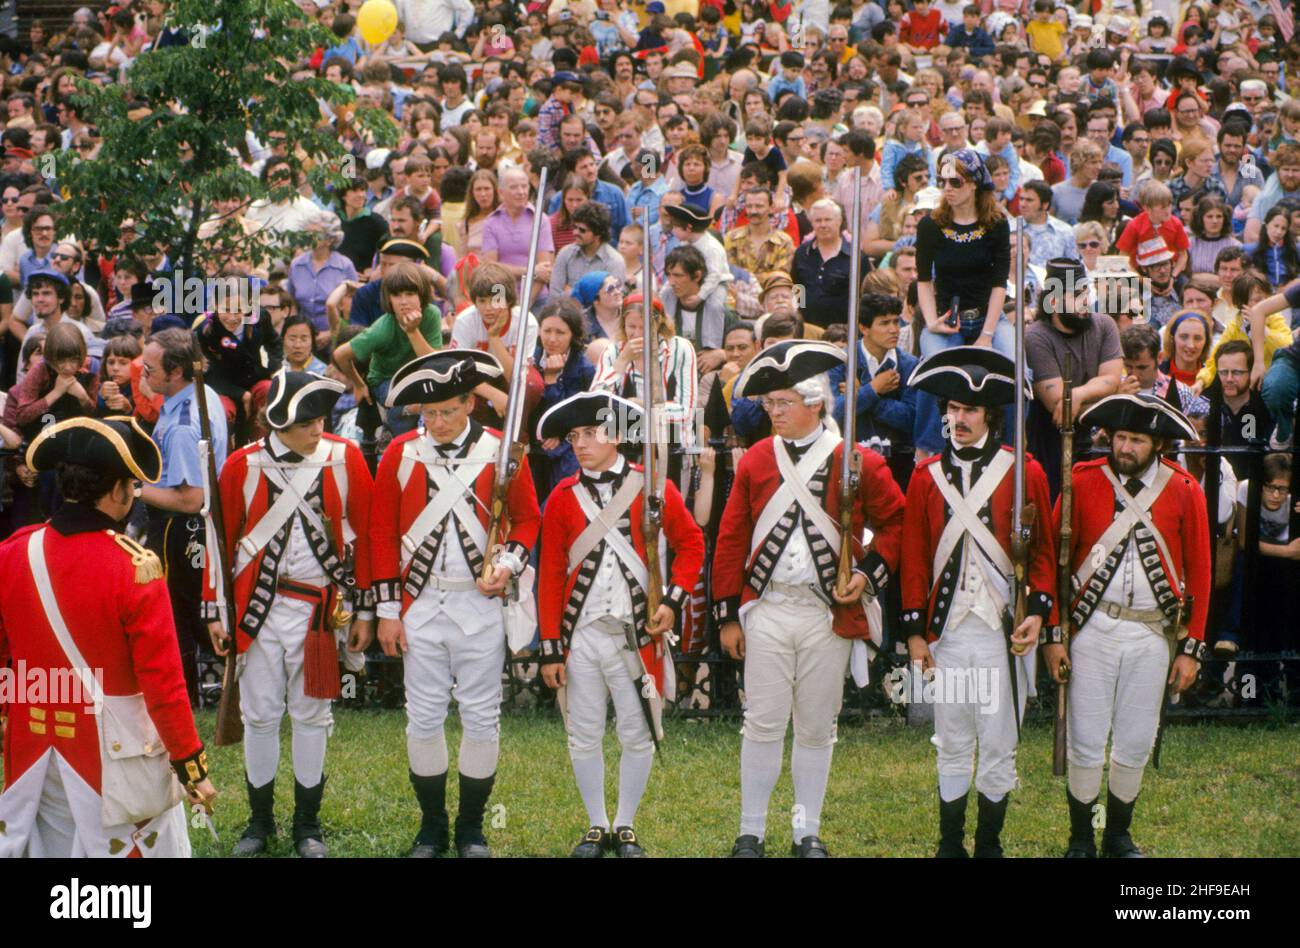 Uniformed volunteer actors stage a reenactment of the American Revolution Battle of Bunker Hill at the original location in Charlestown, MA. Stock Photo